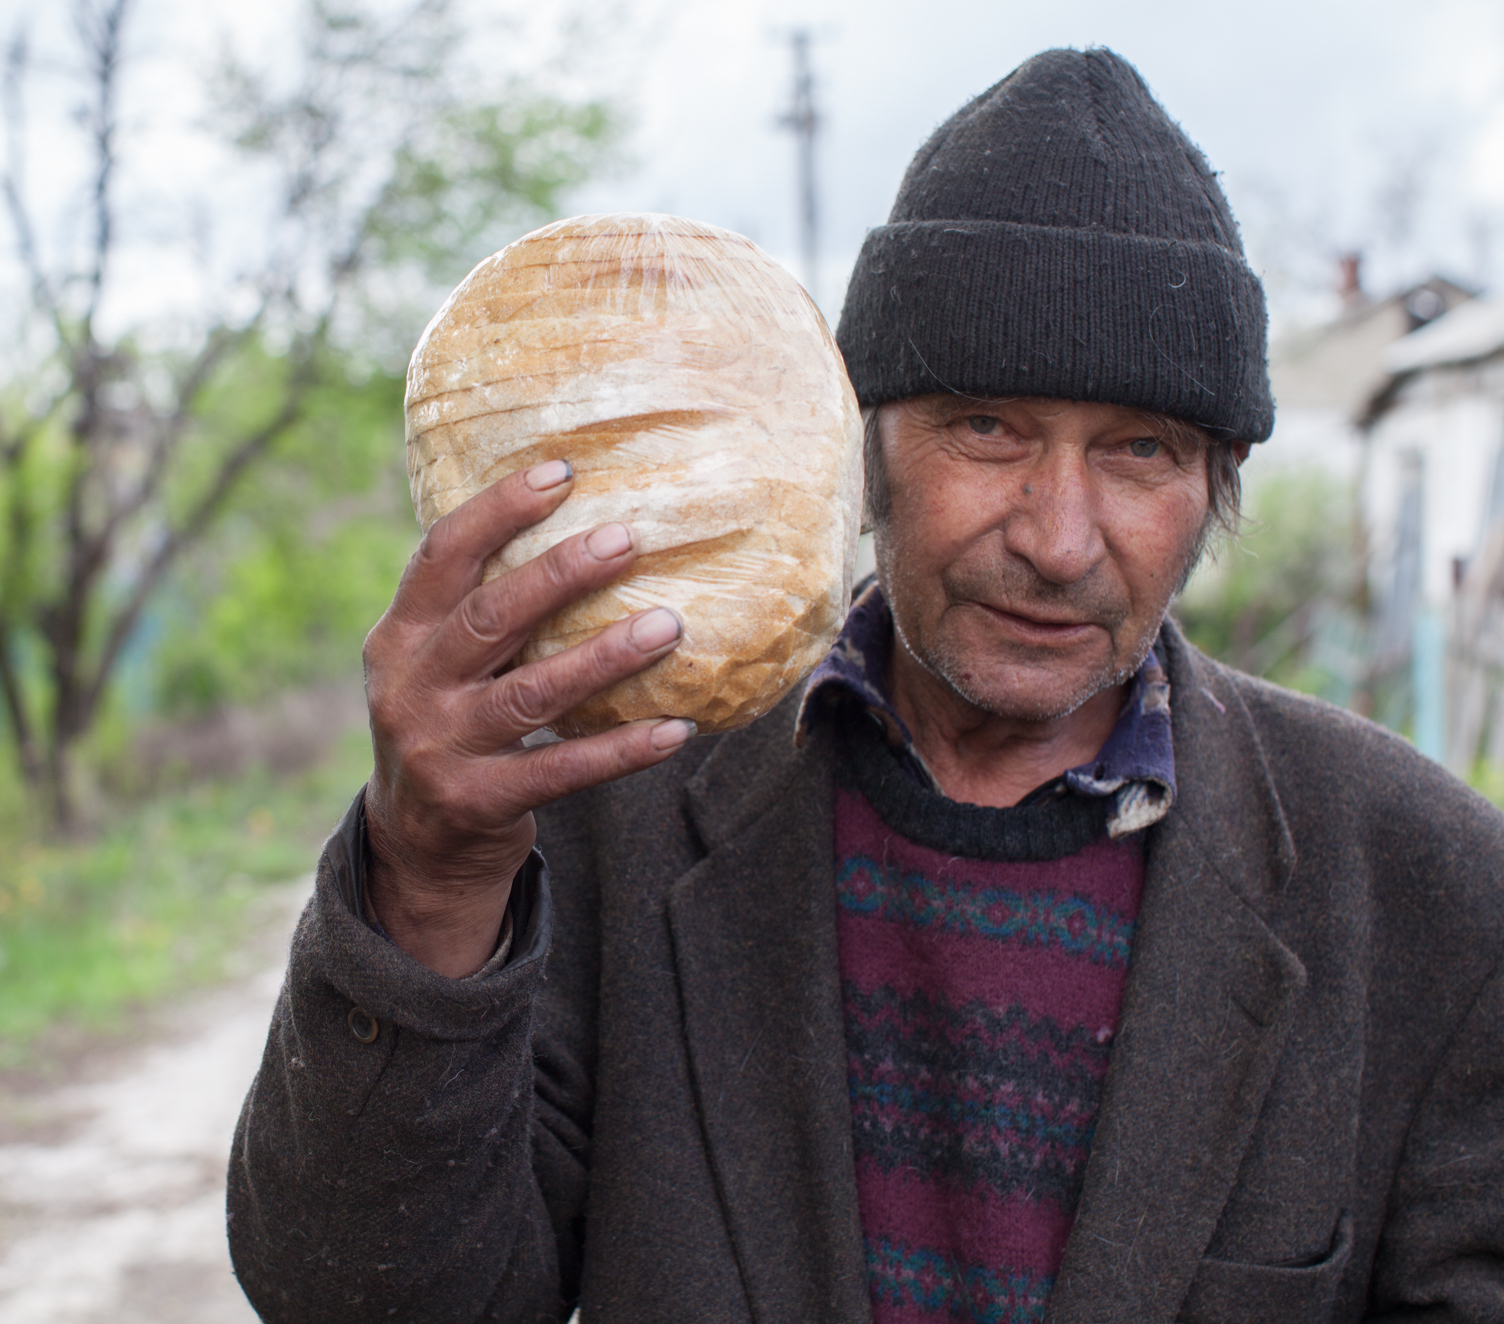 Refugee man from eastern Ukraine holding a loaf of bread